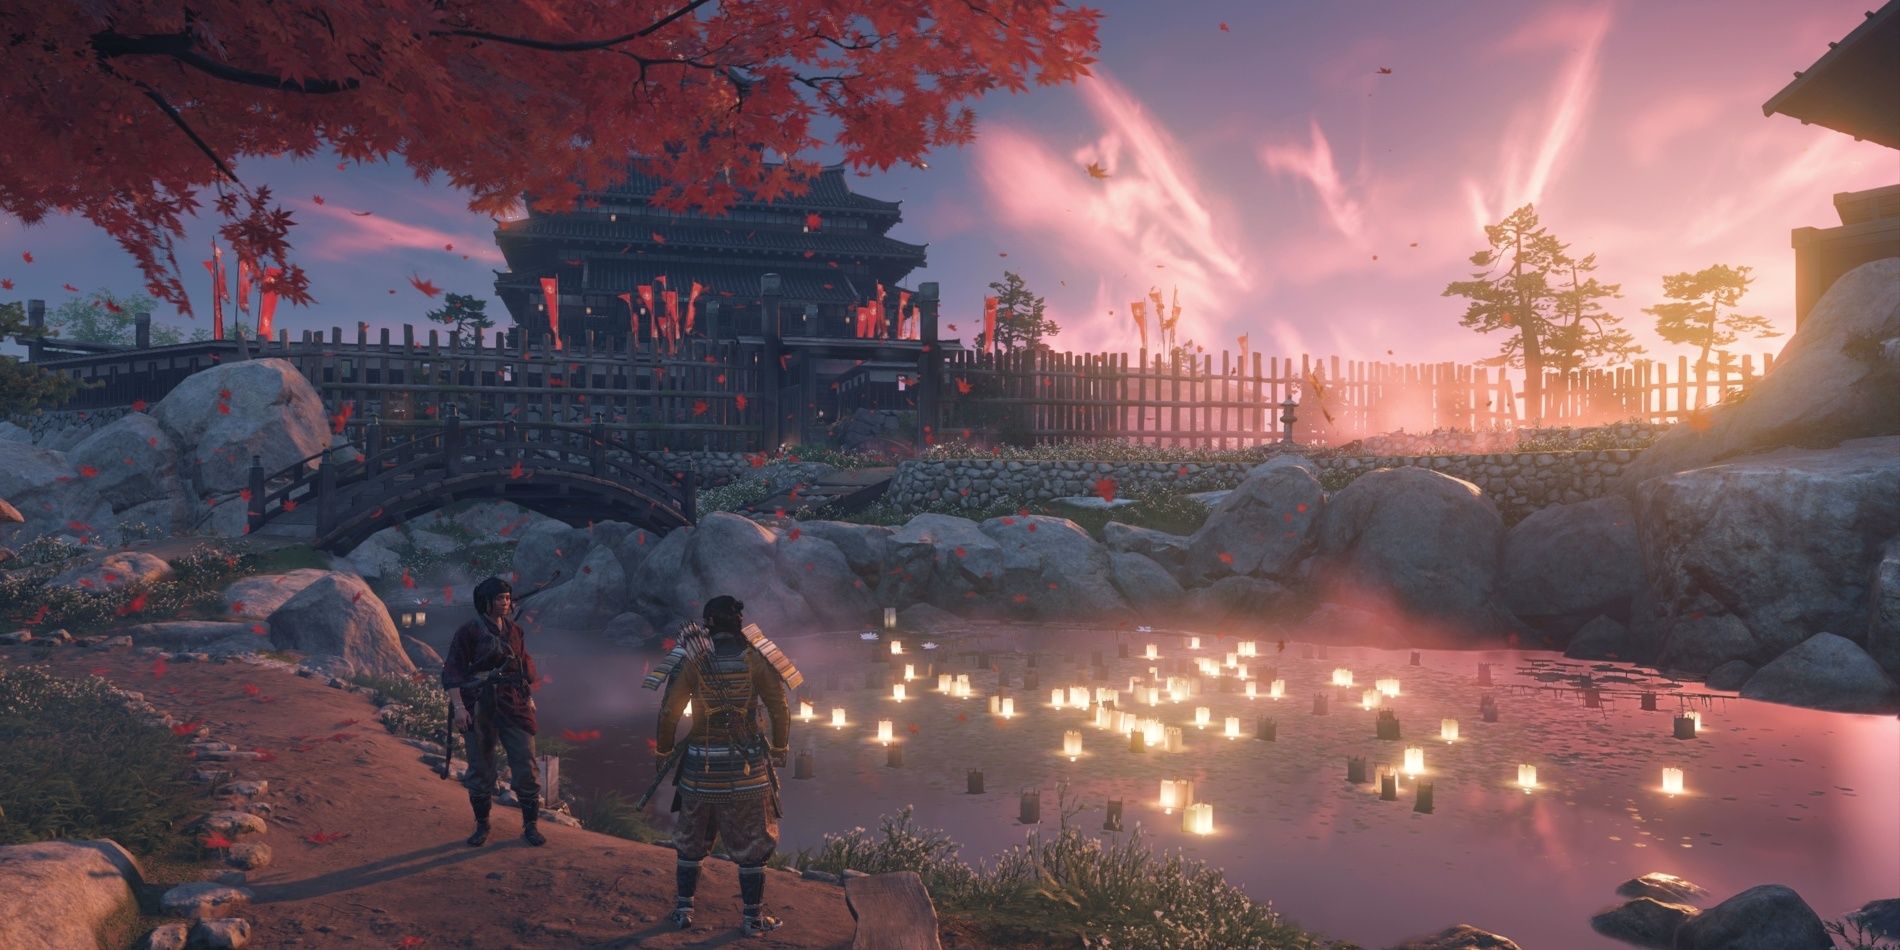 Jin and Yuna ponder in Ghost of Tsushima